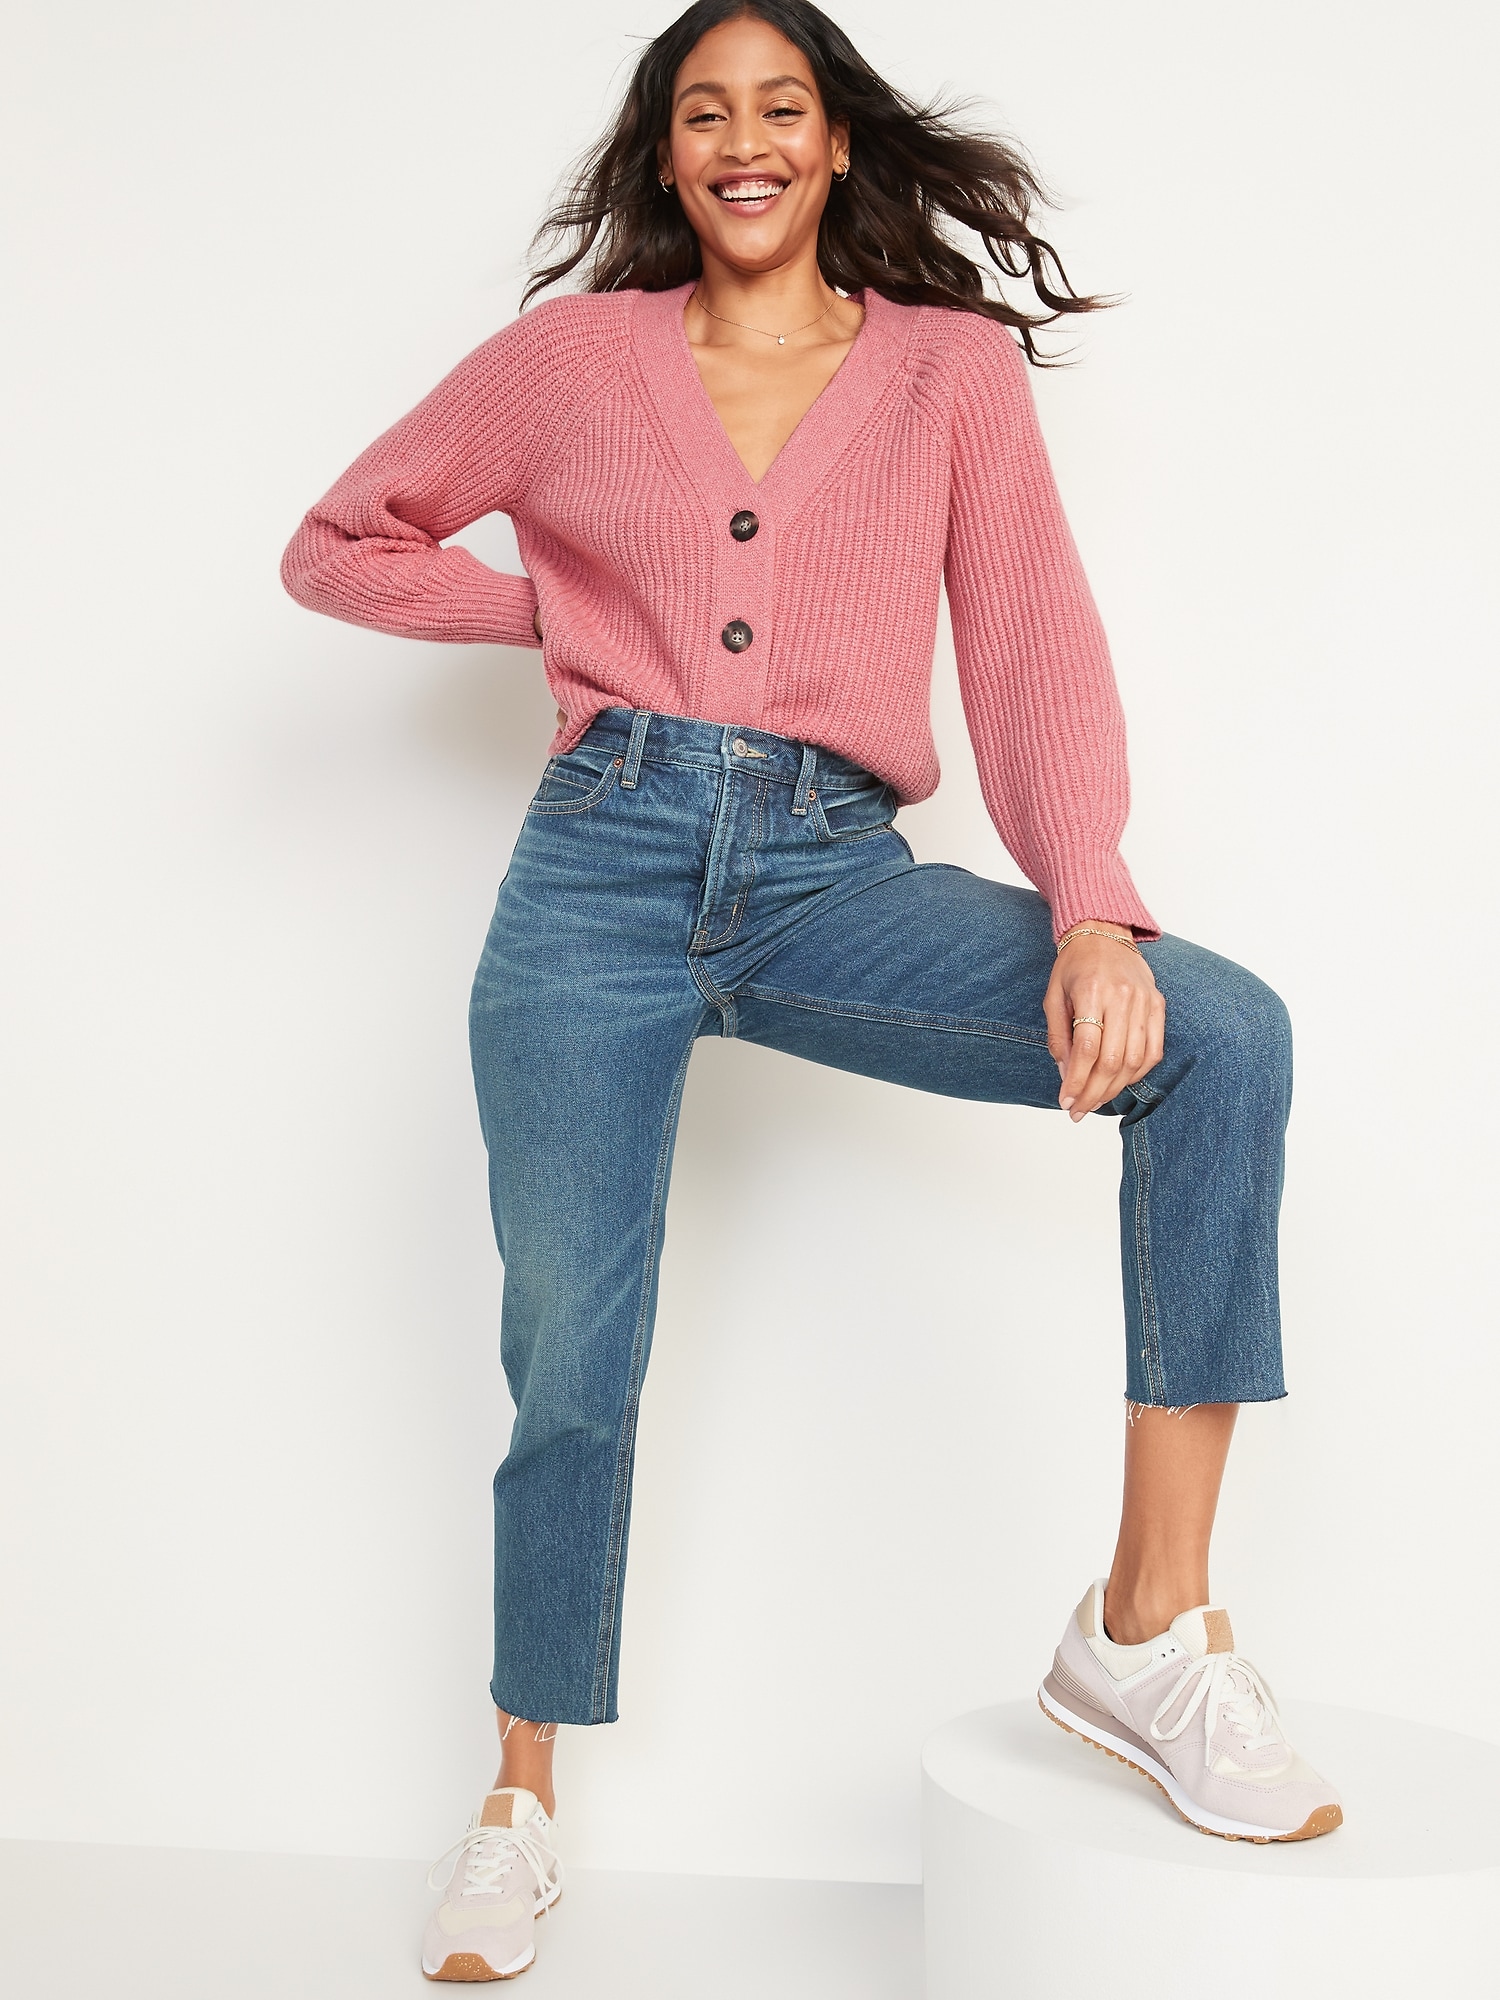 Brushed Shaker-Stitch Cardigan Sweater for Women | Old Navy